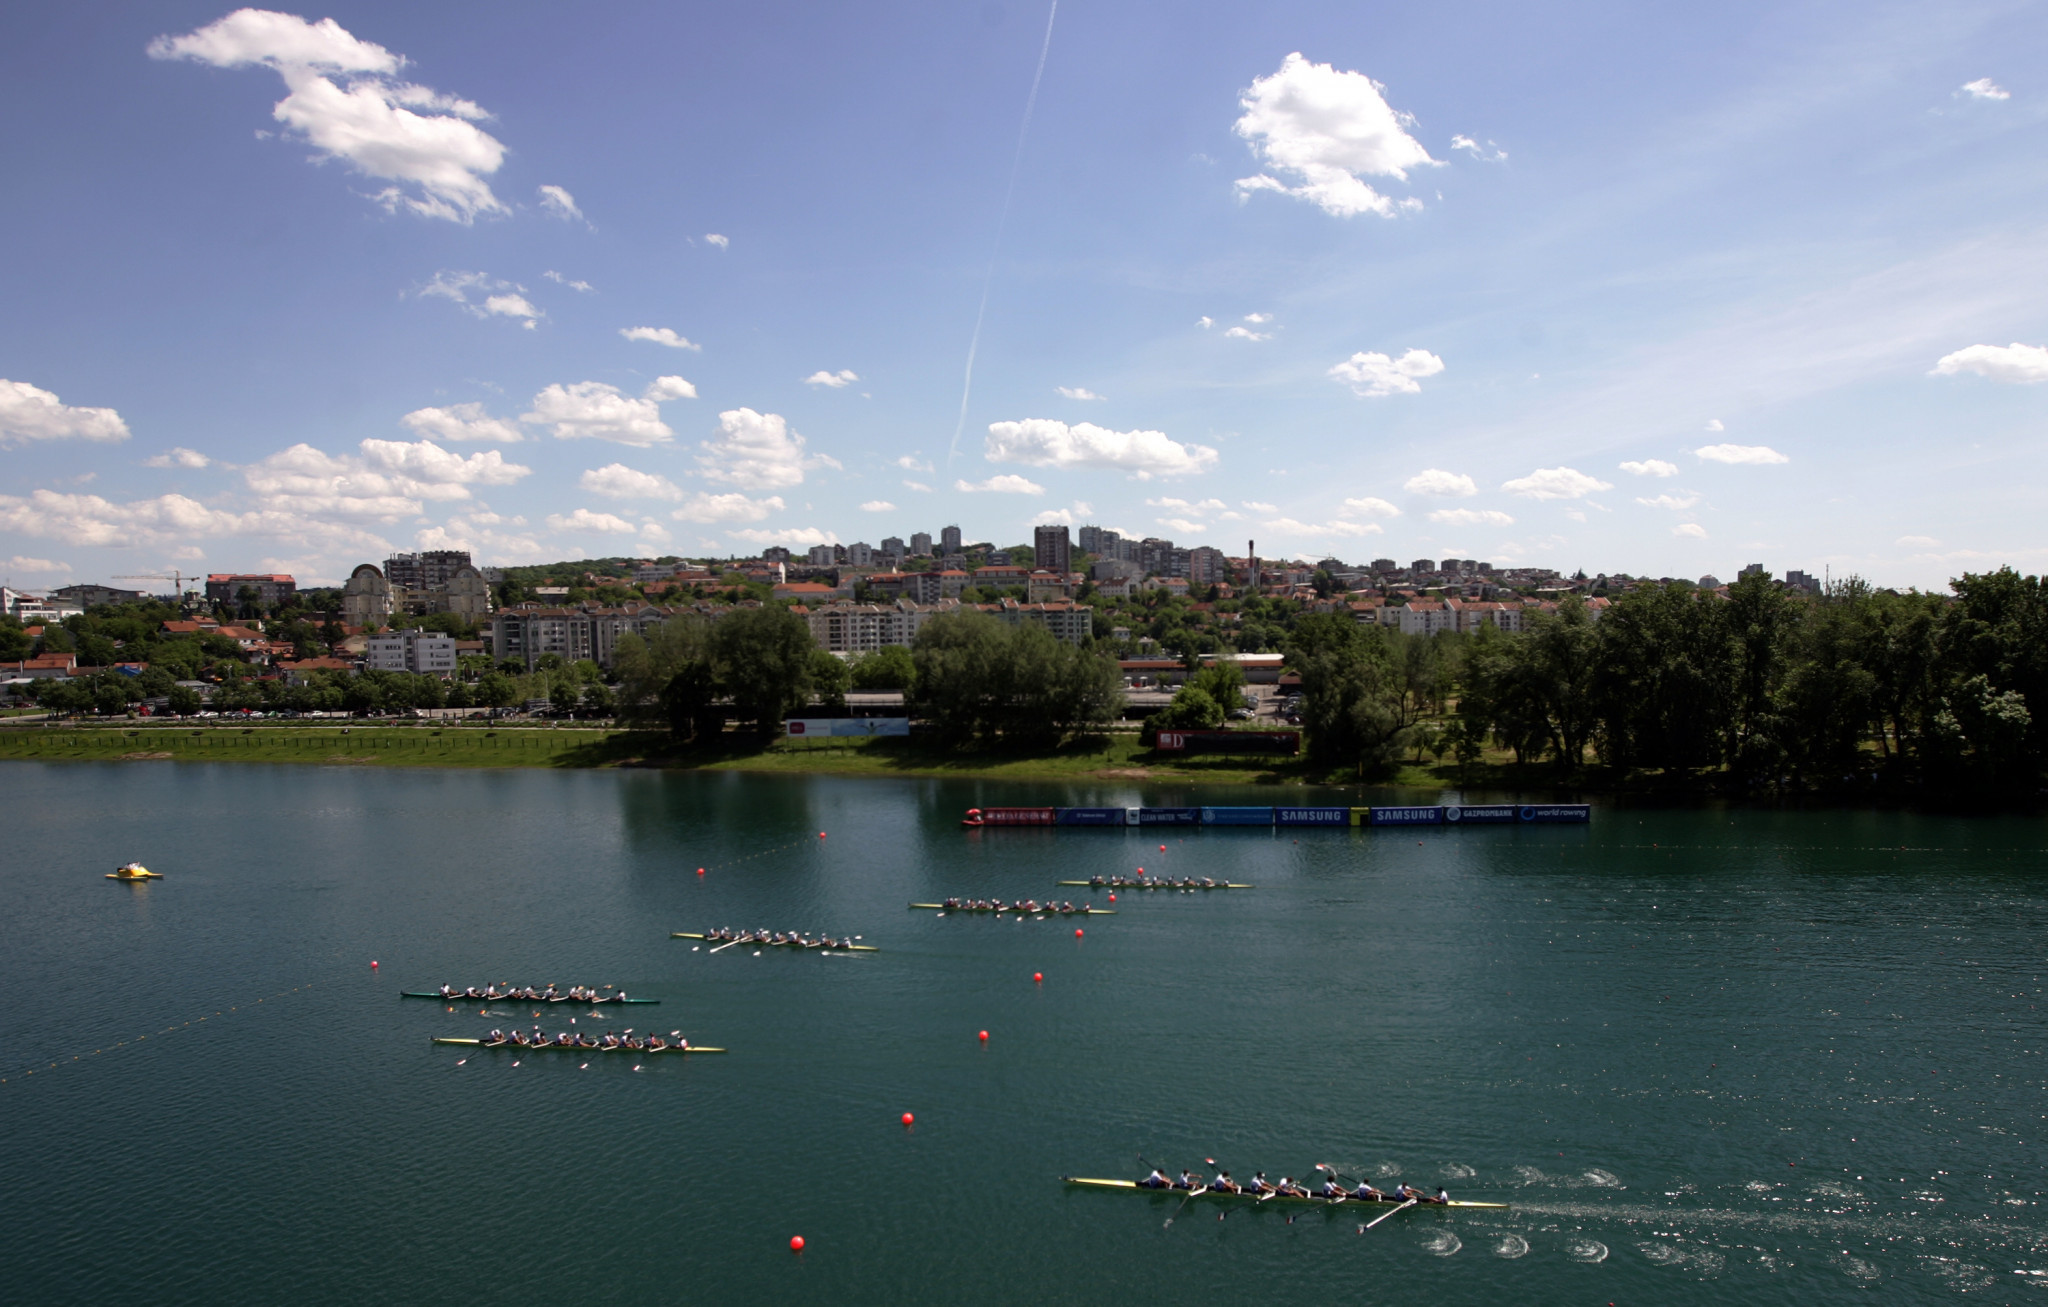 The River Sava in Belgrade is set to host the next World Rowing Championships, which will see athletes qualify for the Paris 2024 Olympic Games ©Getty Images